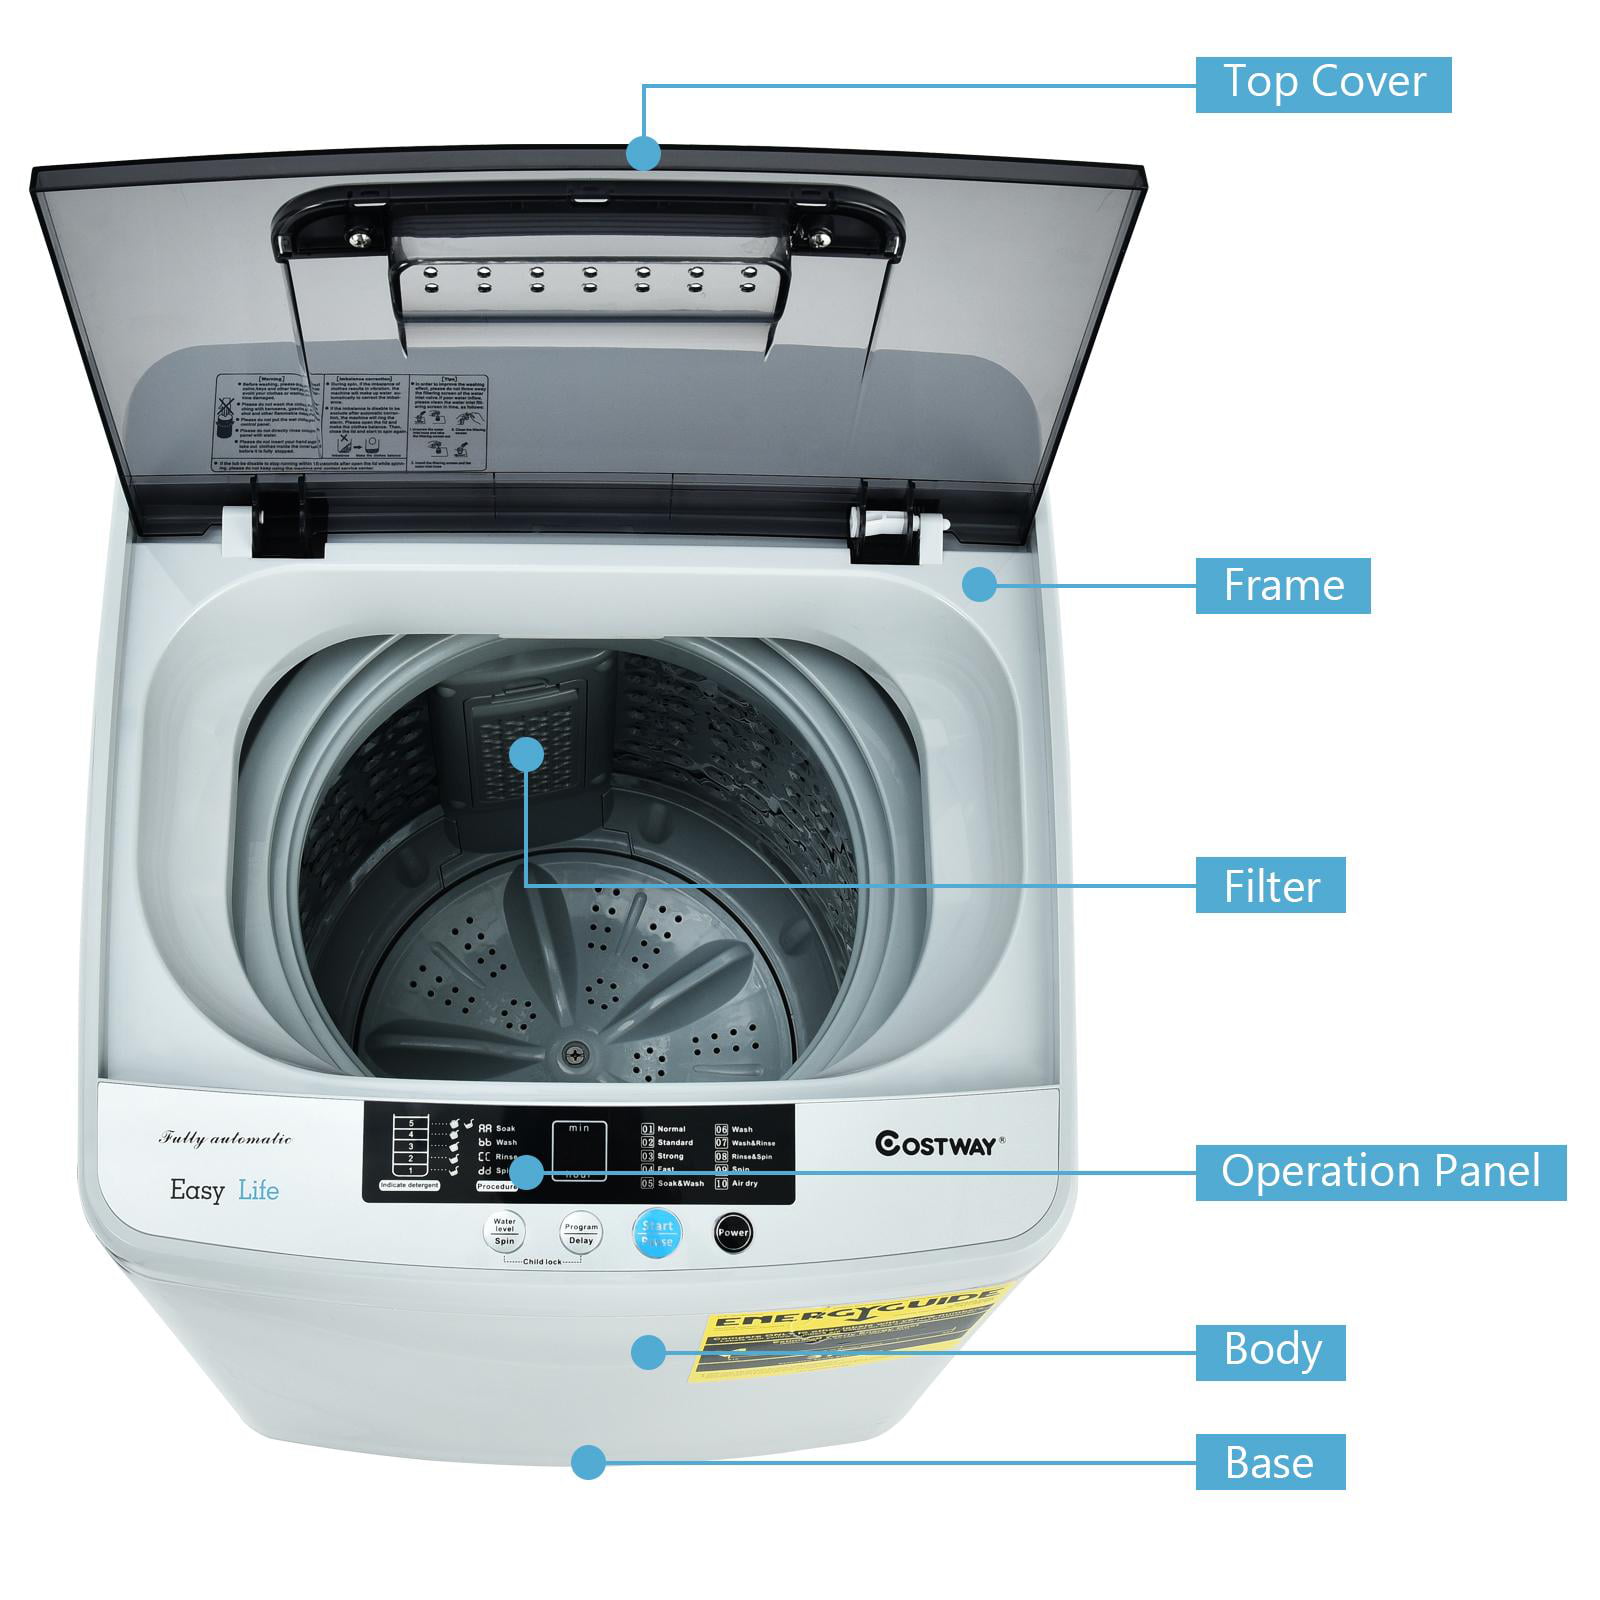 Giantex Compact Washing Machine Portable Washer and Dryer 10 lbs Capacity 